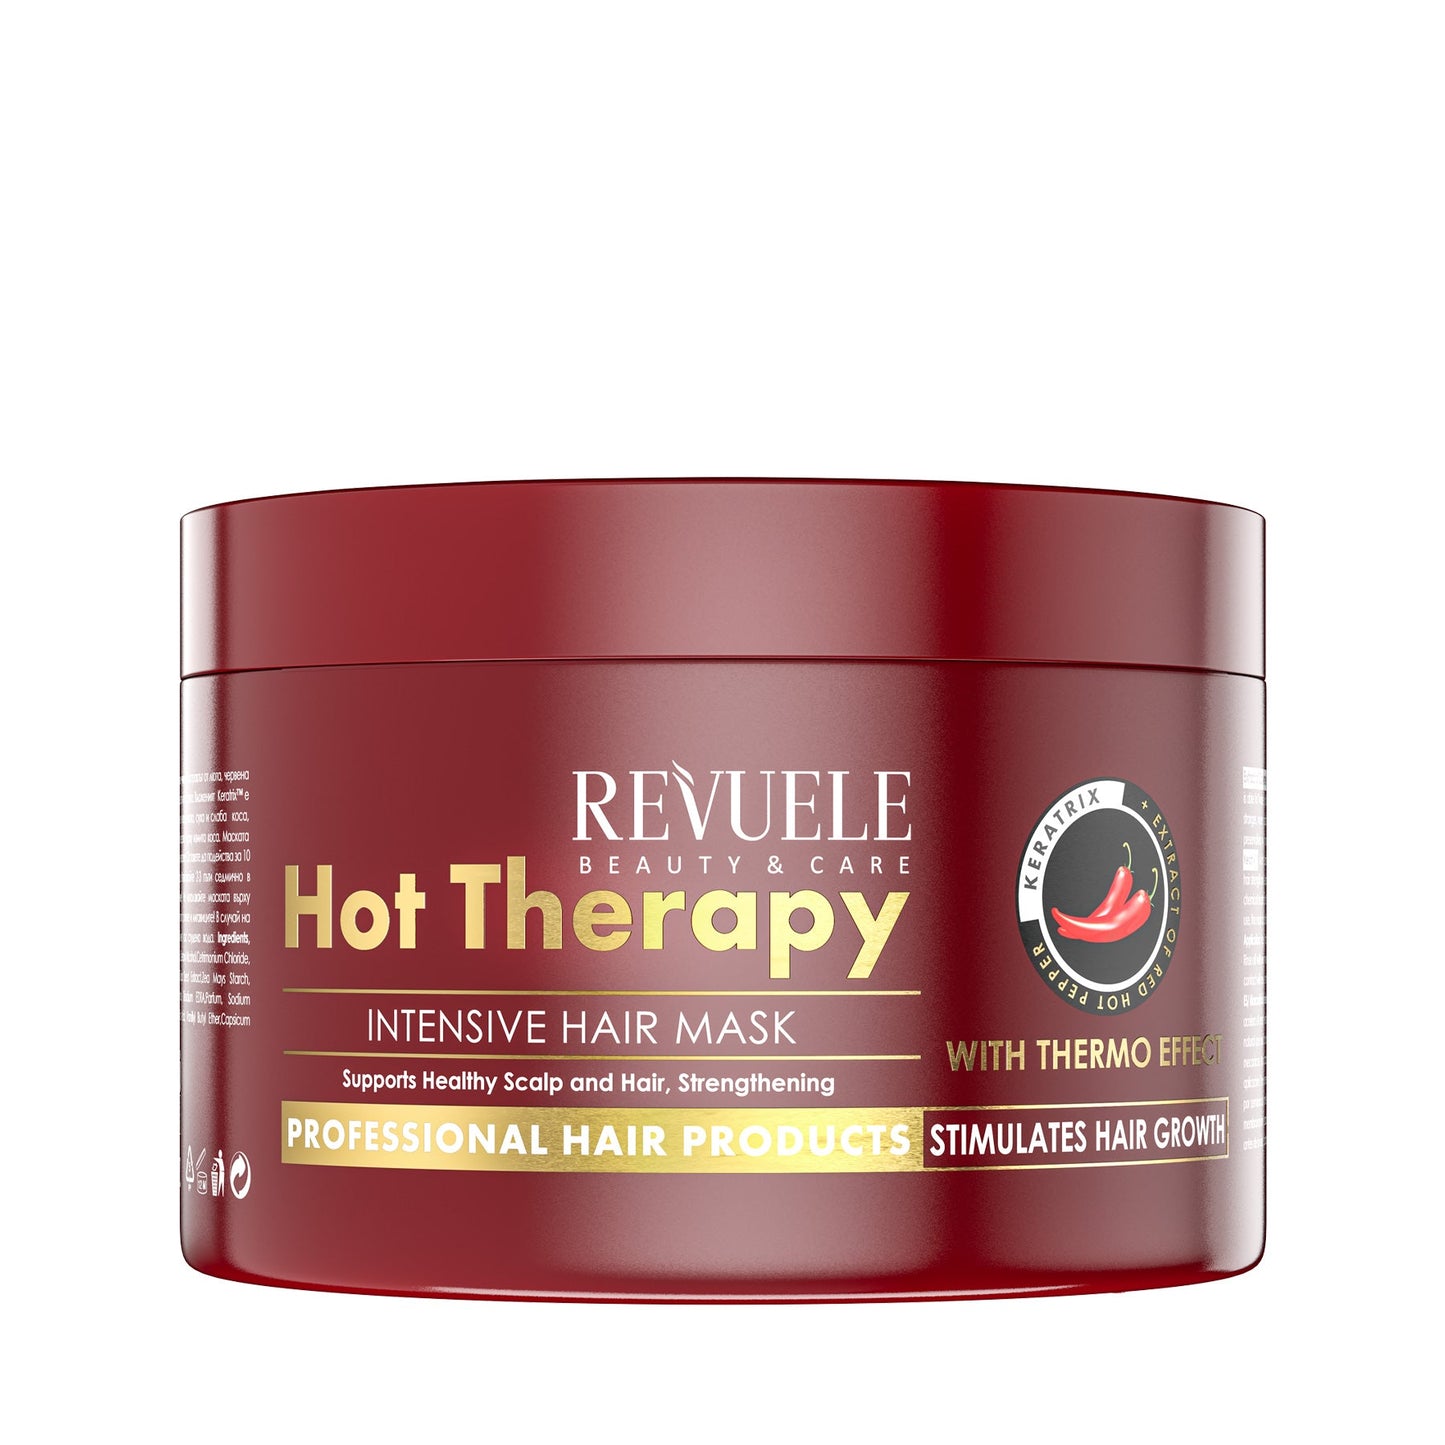 Revuele PROFESSIONAL HAIR PRODUCTS Intensive Hair Mask with Thermo Effect Hot Therapy